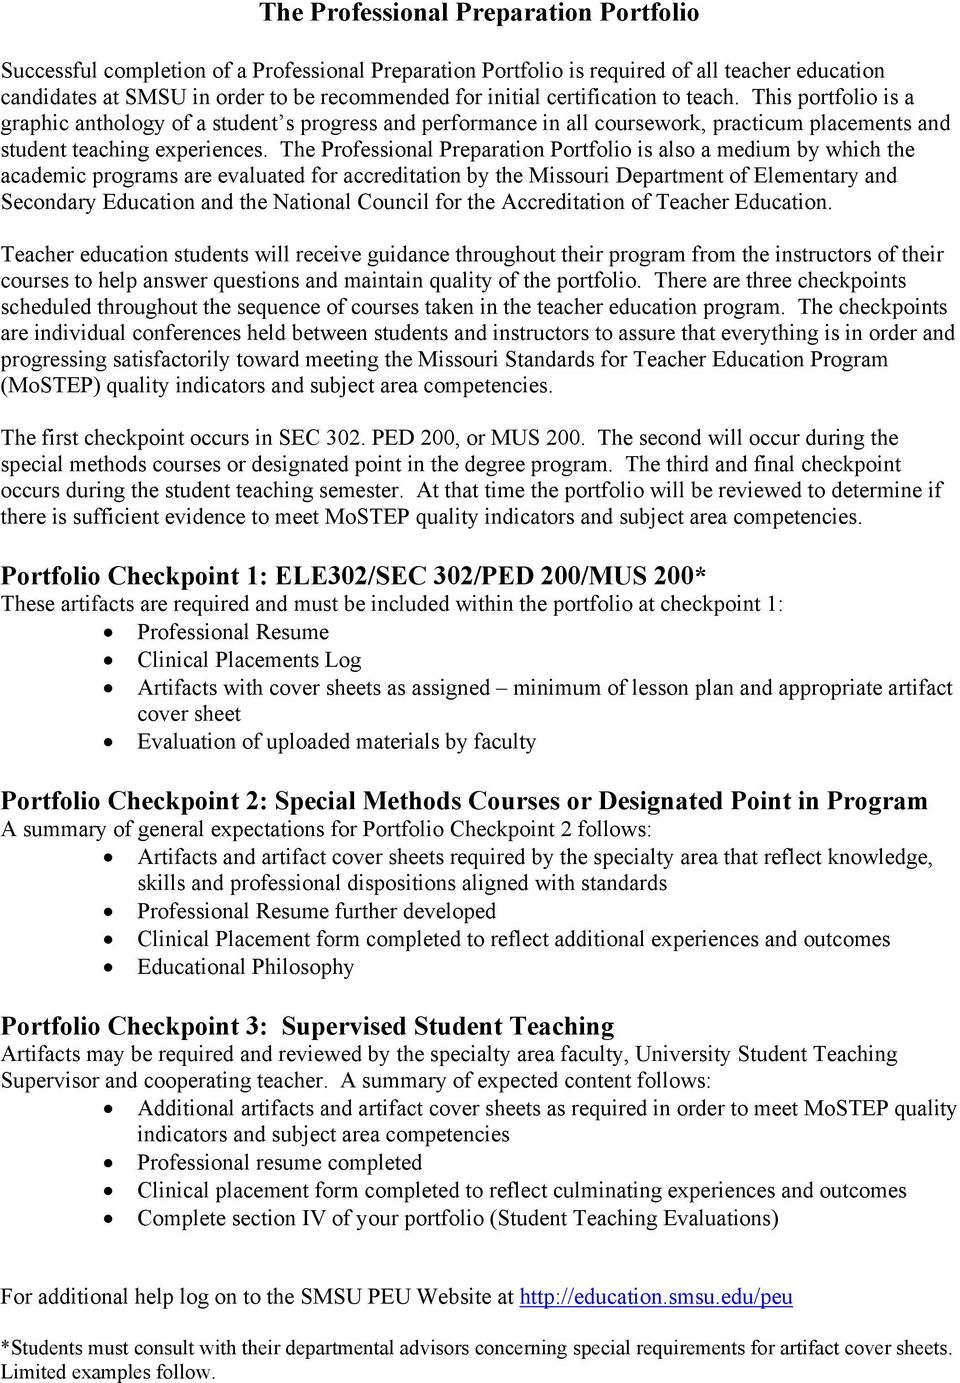 The Professional Preparation Portfolio is also a medium by which the academic programs are evaluated for accreditation by the Missouri Department of Elementary and Secondary Education and the